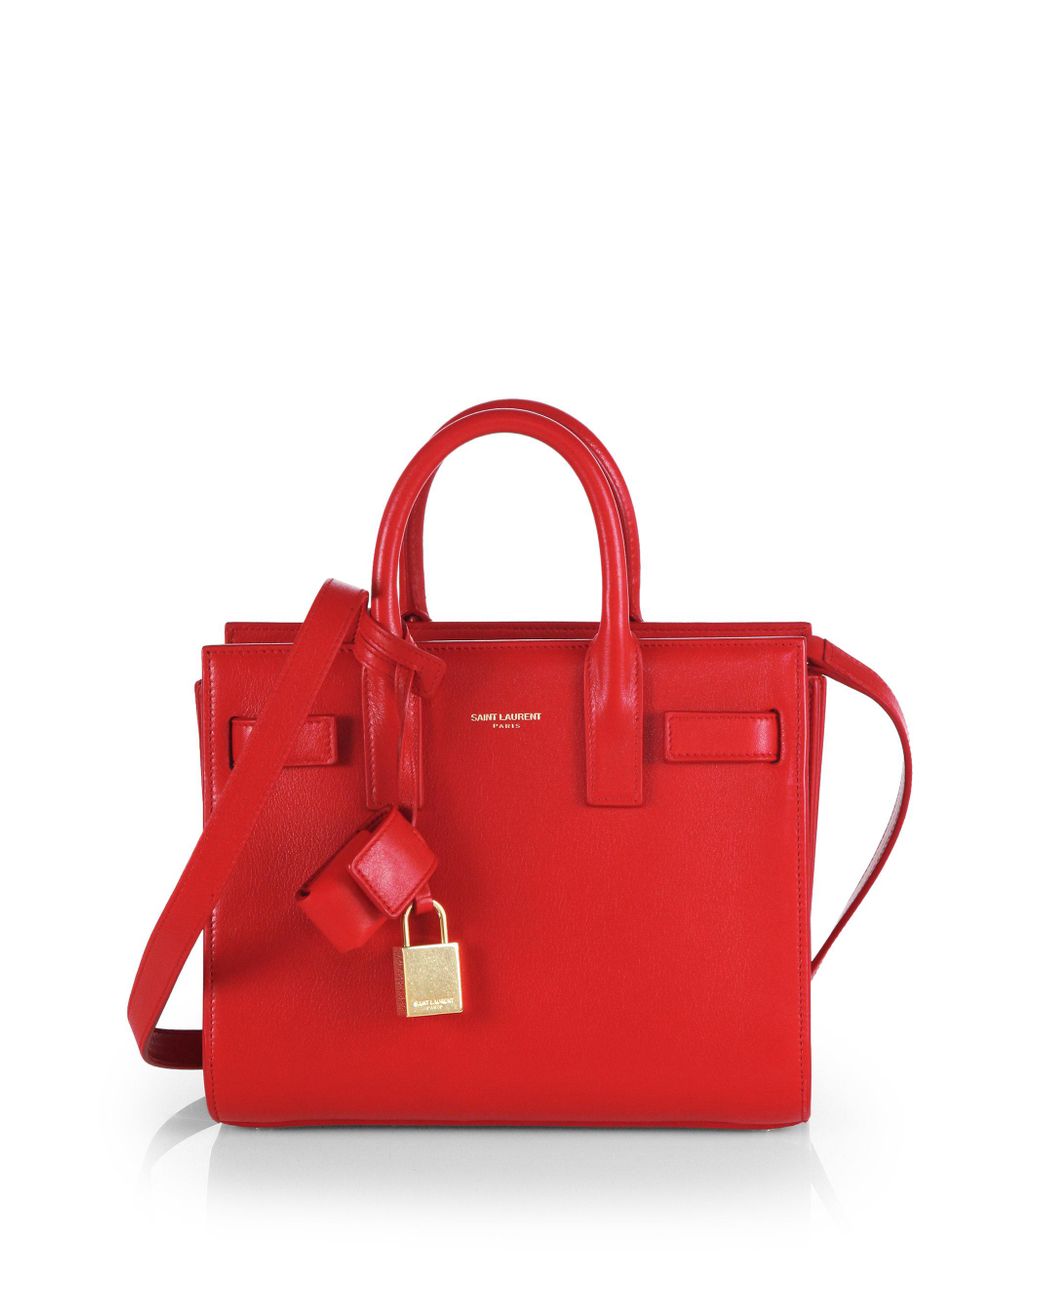 Sac de jour leather tote Saint Laurent Red in Leather - 22821766